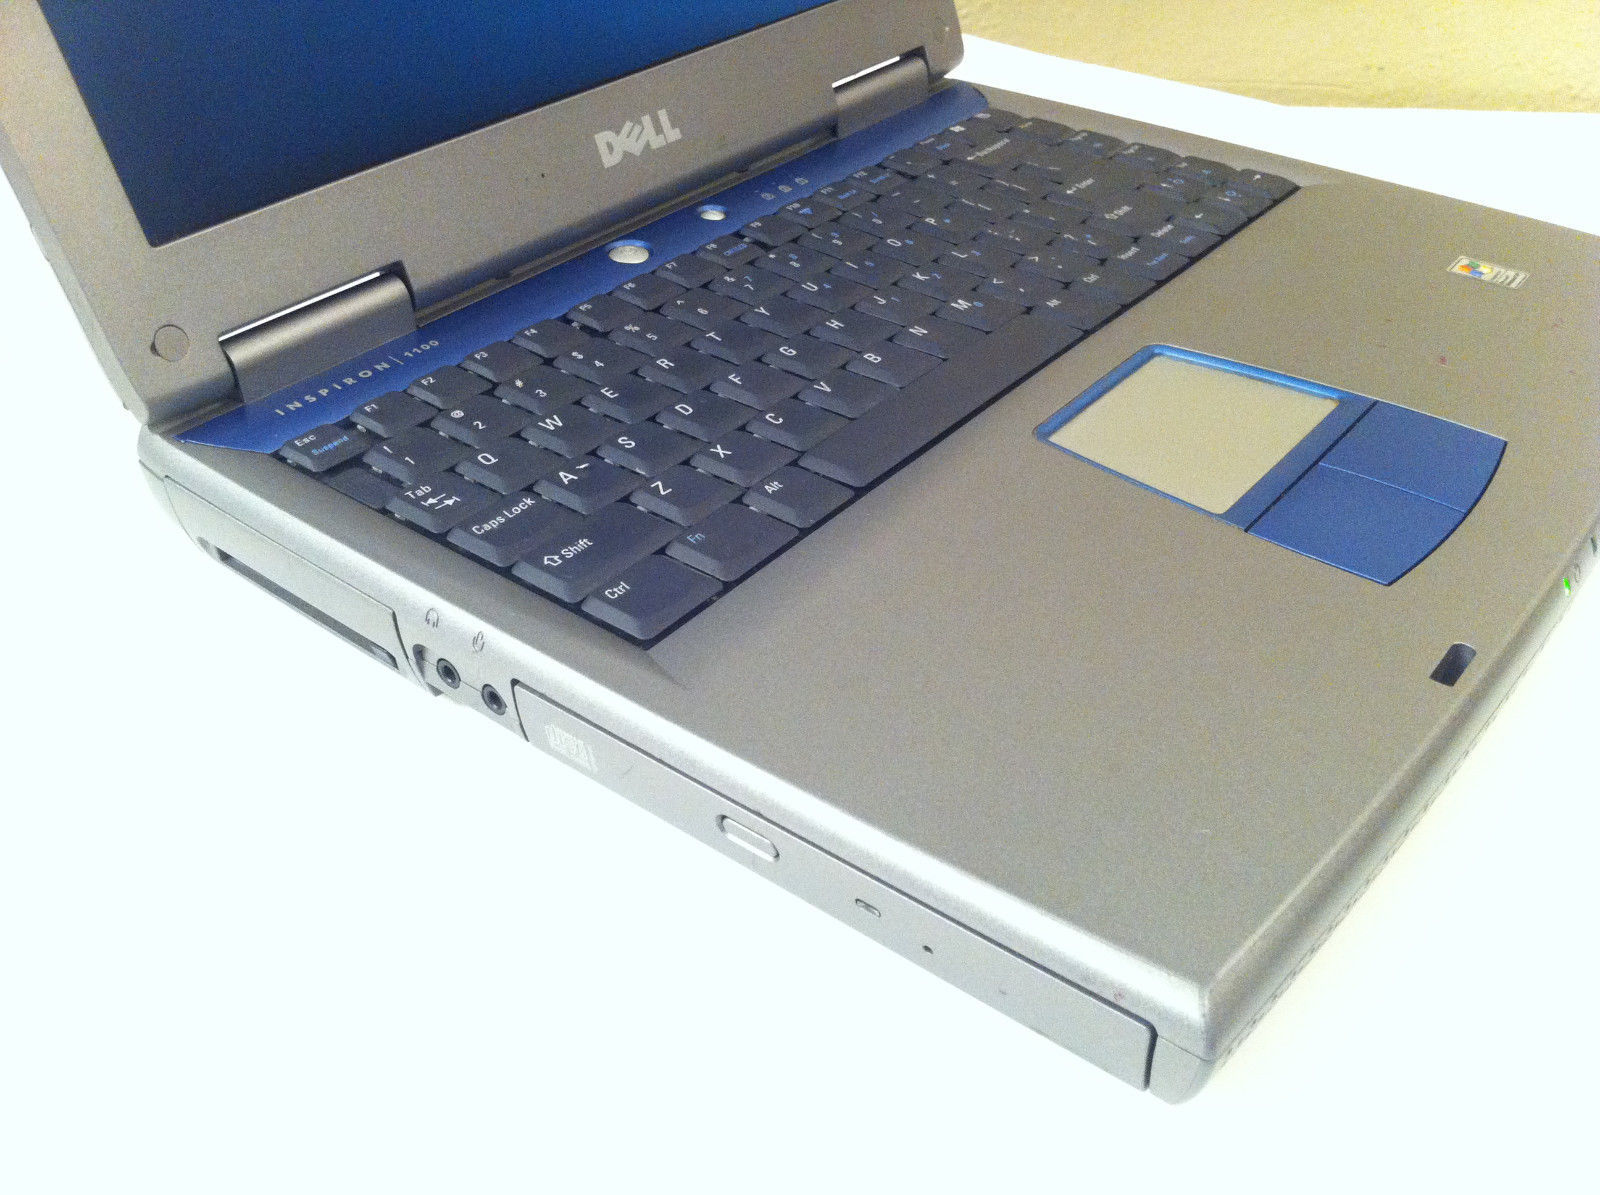 Dell Inspiron 1100 Laptop Computer Pc Laptops And Netbooks 4335